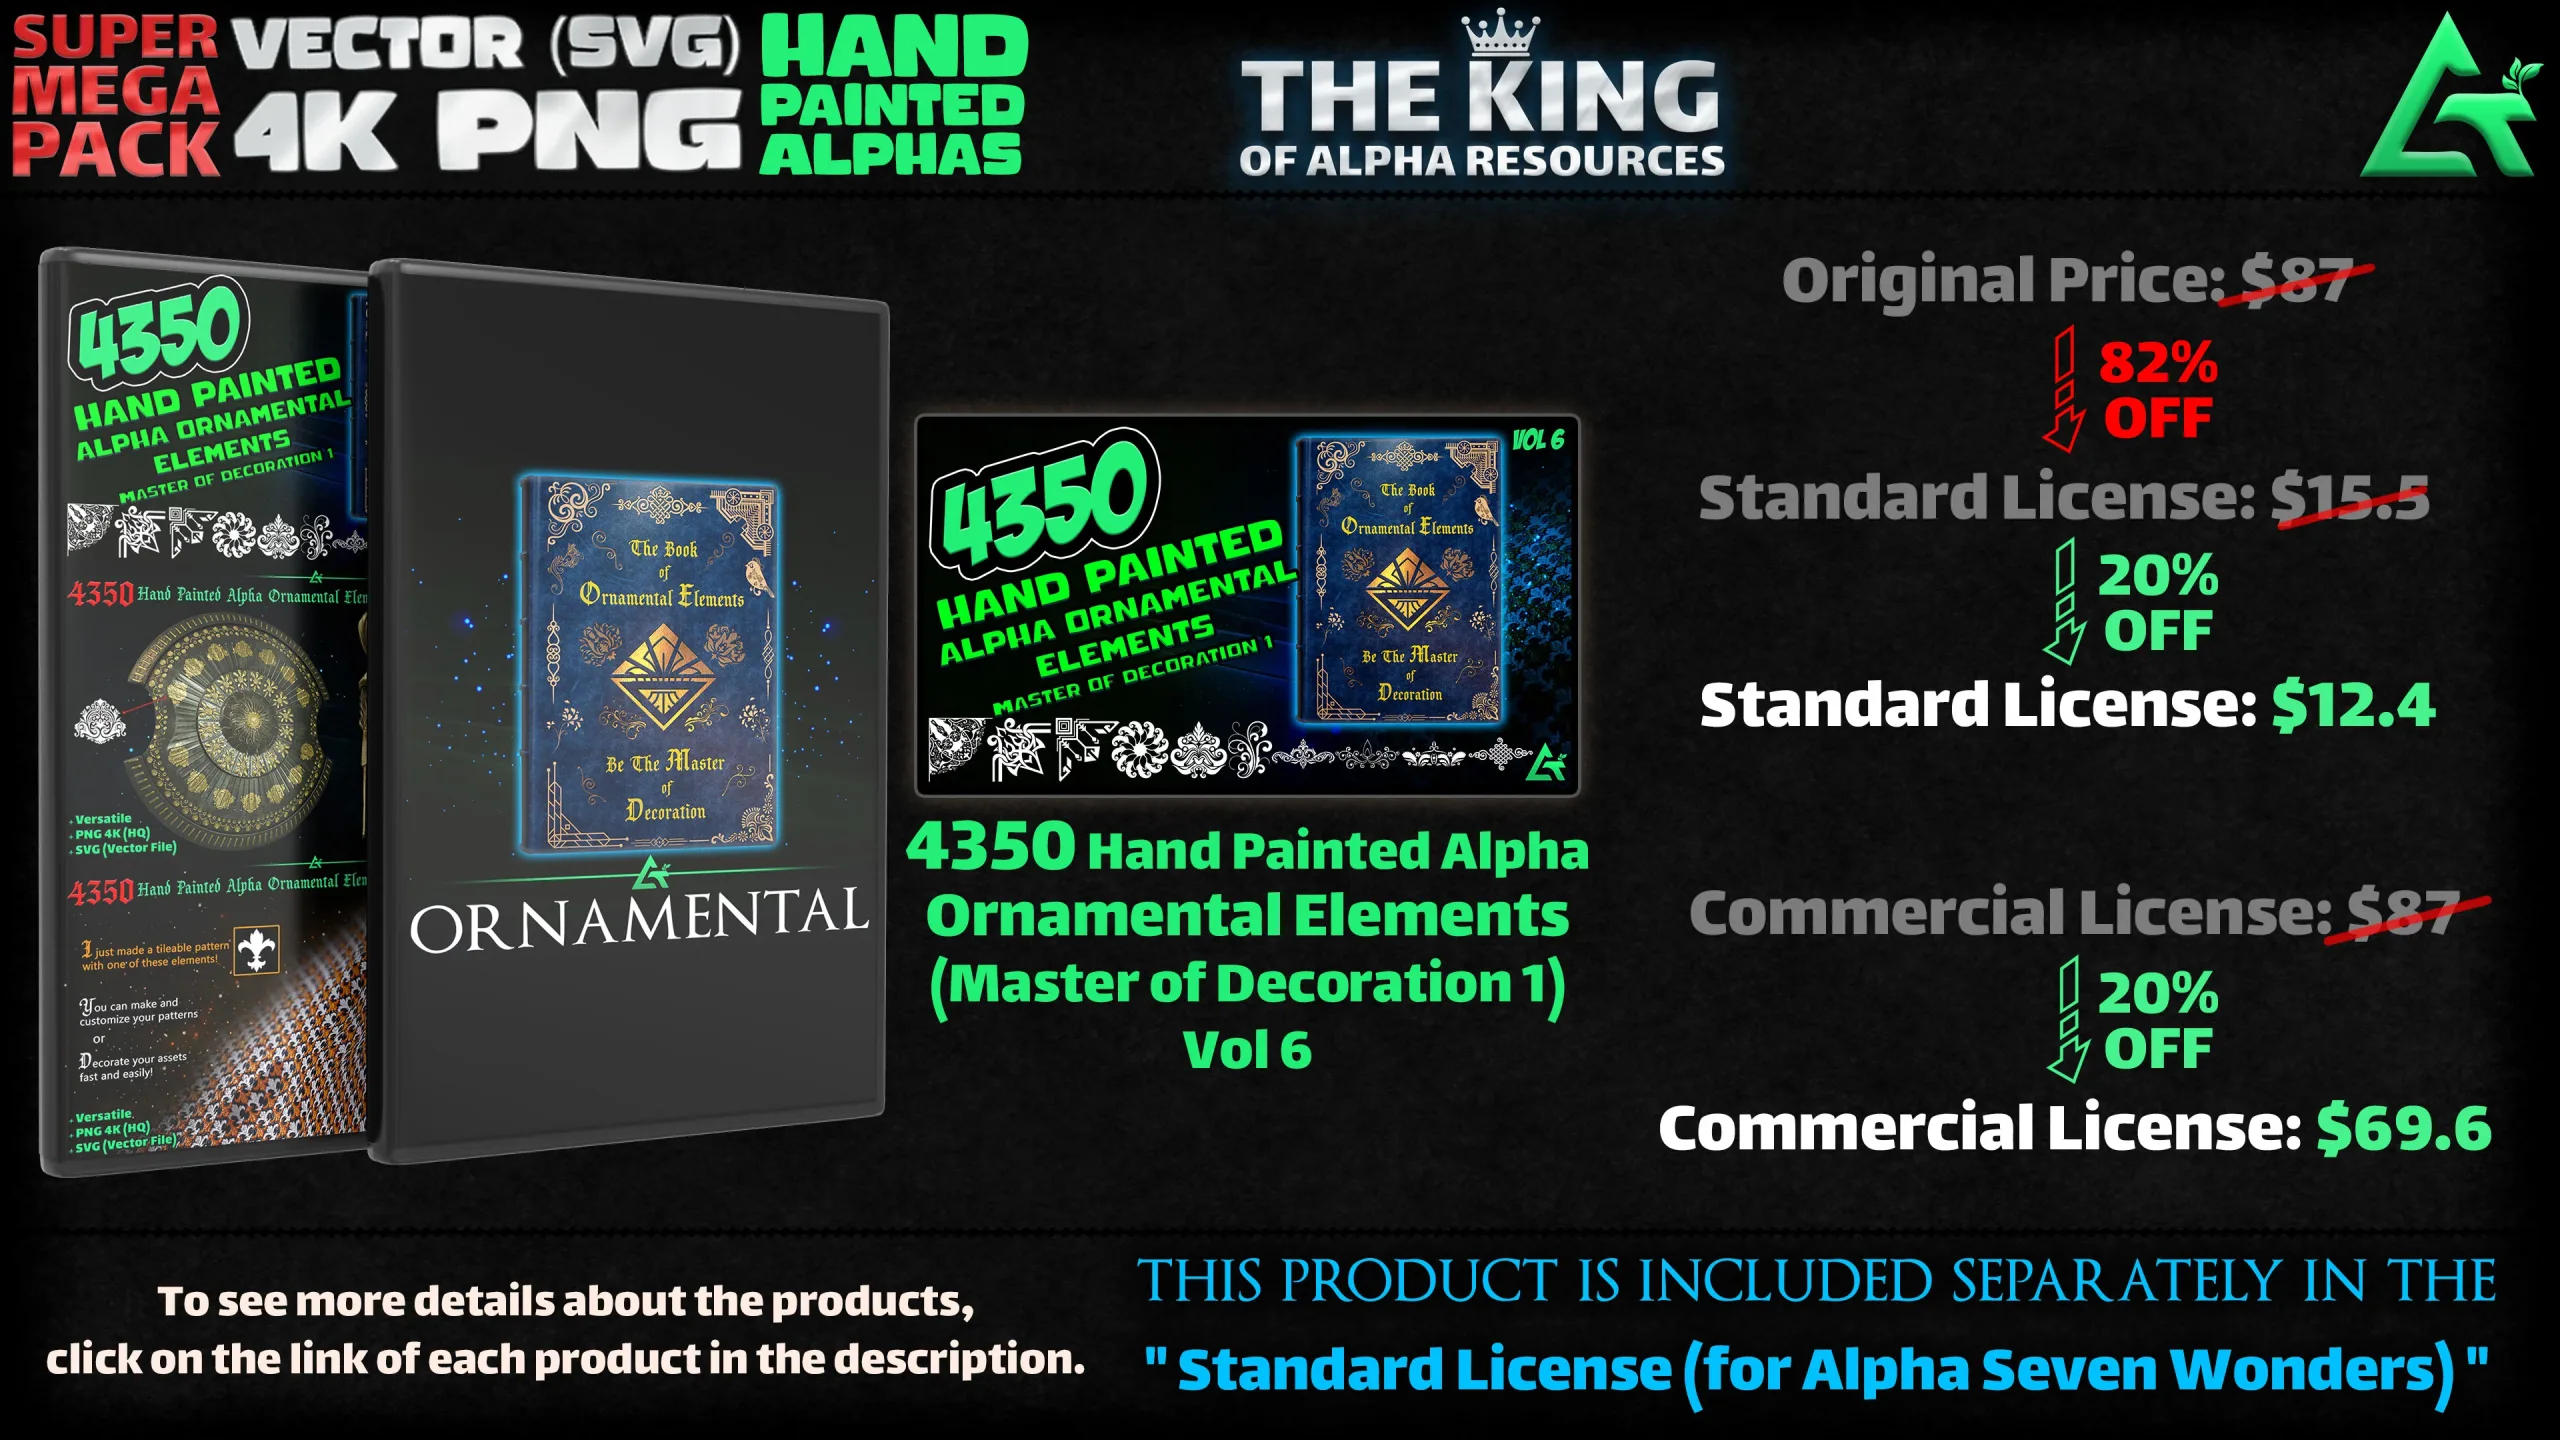 48300 Hand Painted Alpha Designs and Patterns - THE KING OF ALPHA RESOURCES - SUPER MEGA PACKAGE - The Largest Package You Have Ever Seen!